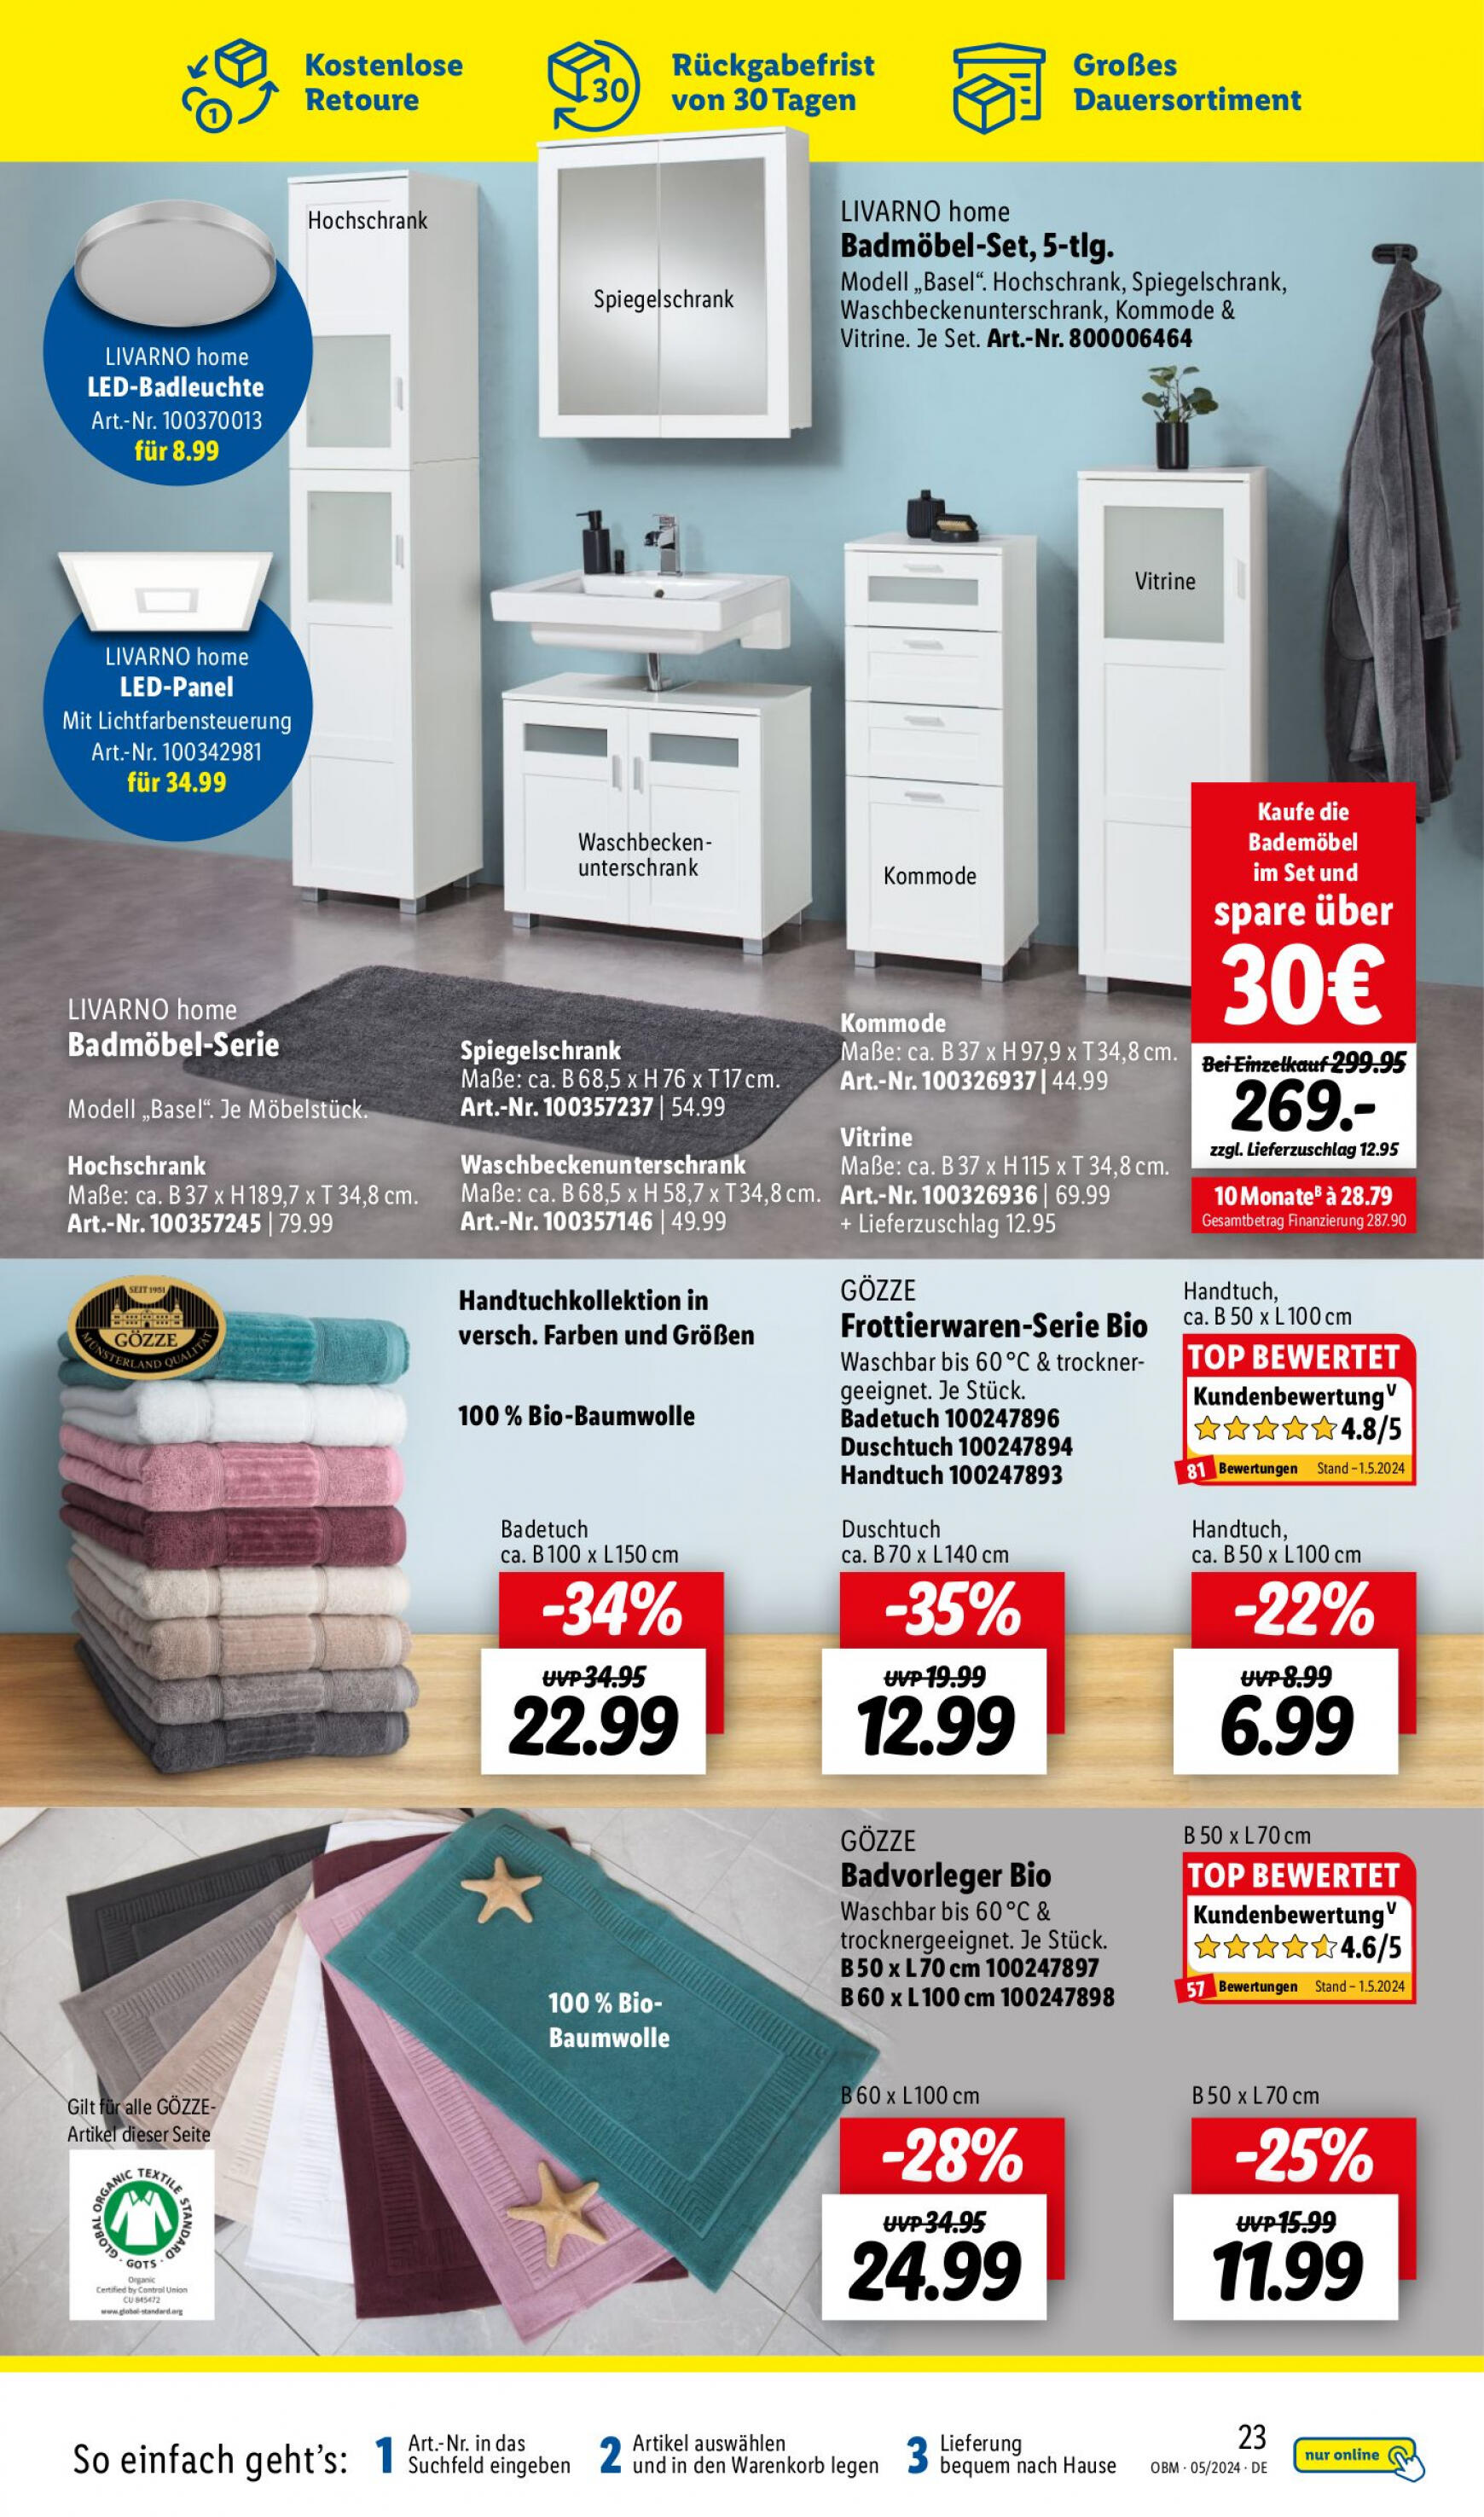 lidl - Flyer Lidl - Aktuelle Onlineshop-Highlights aktuell 01.05. - 31.05. - page: 23